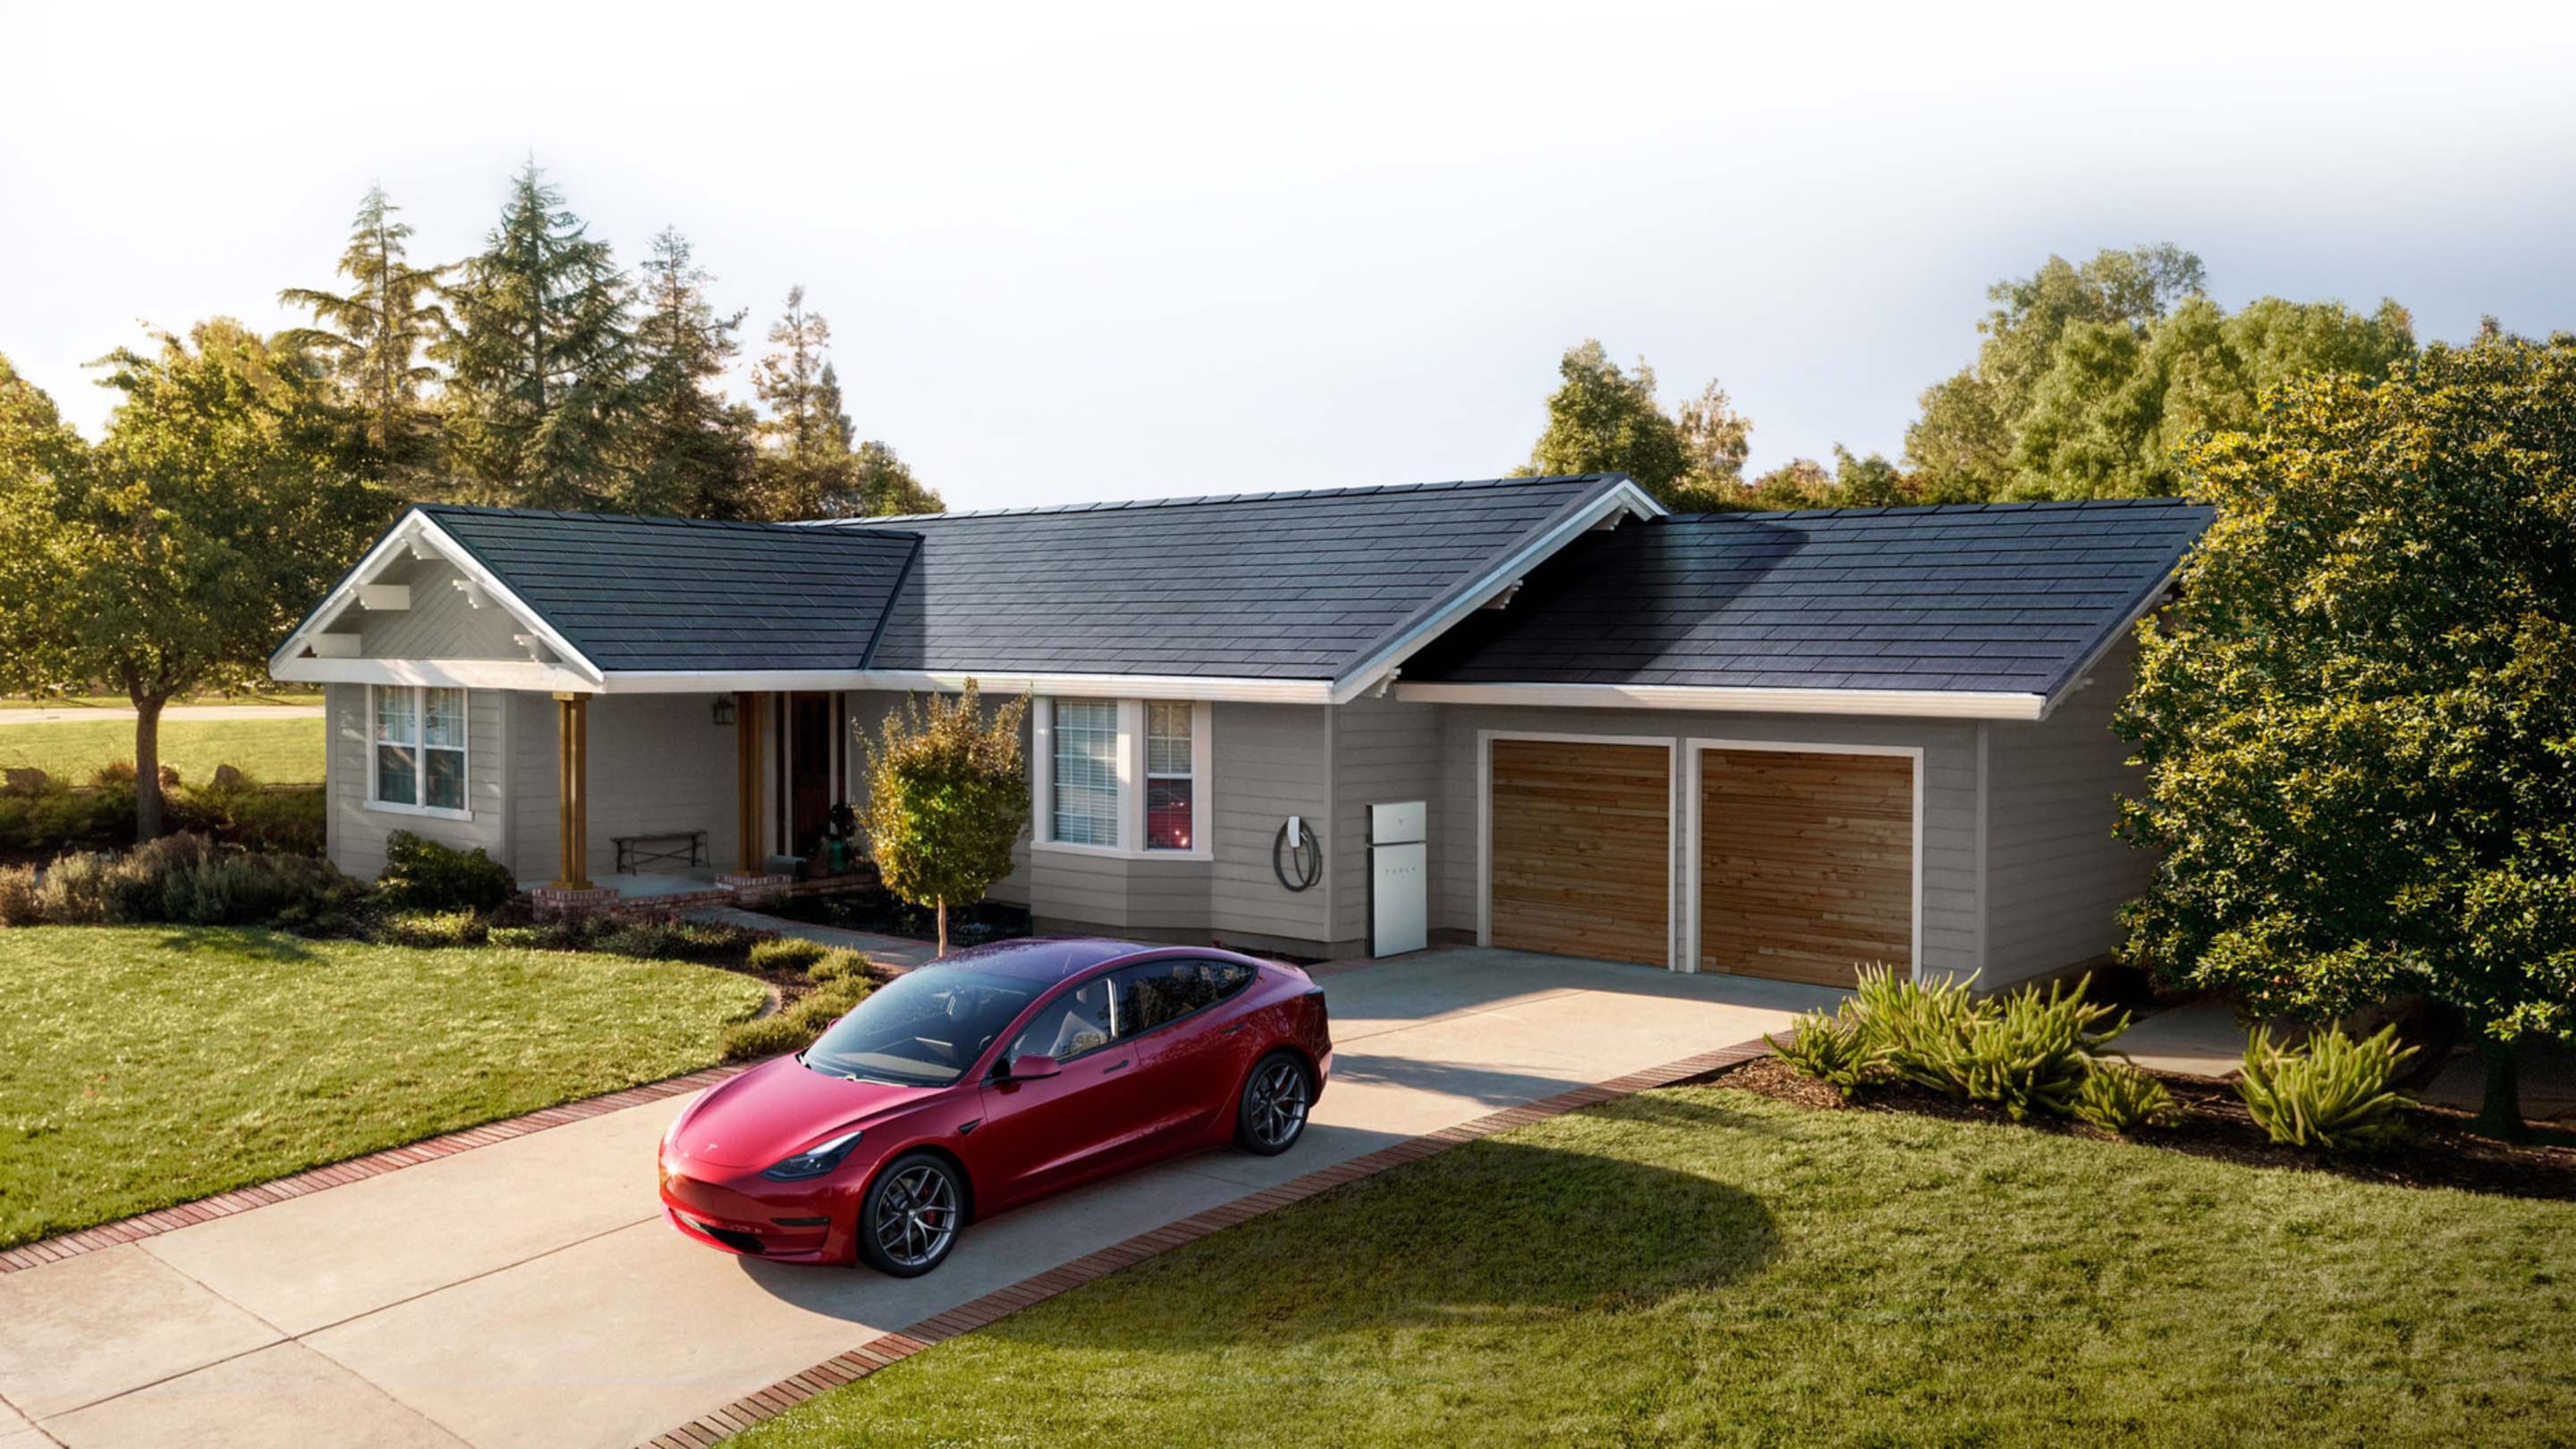 Home with Tesla Solar Roof and Model 3